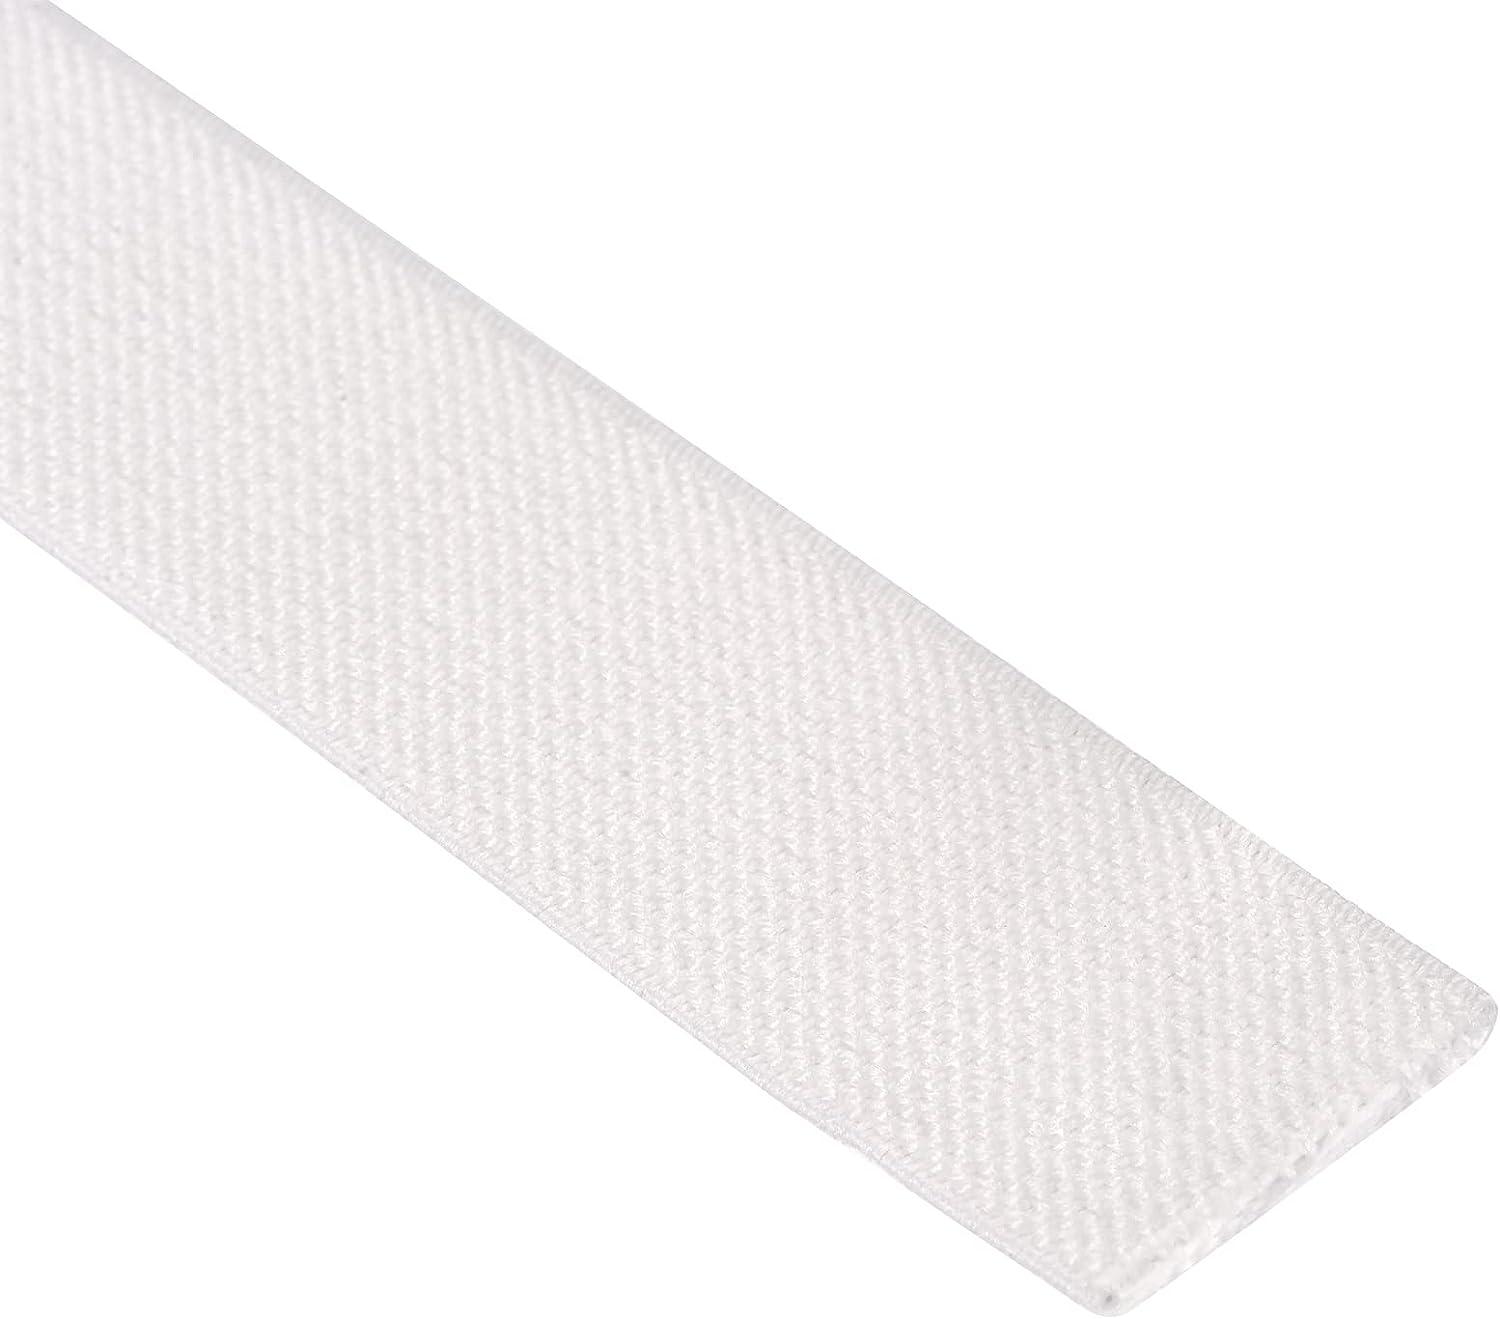  MECCANIXITY Twill Wide Elastic Band Double-Side 2 inch